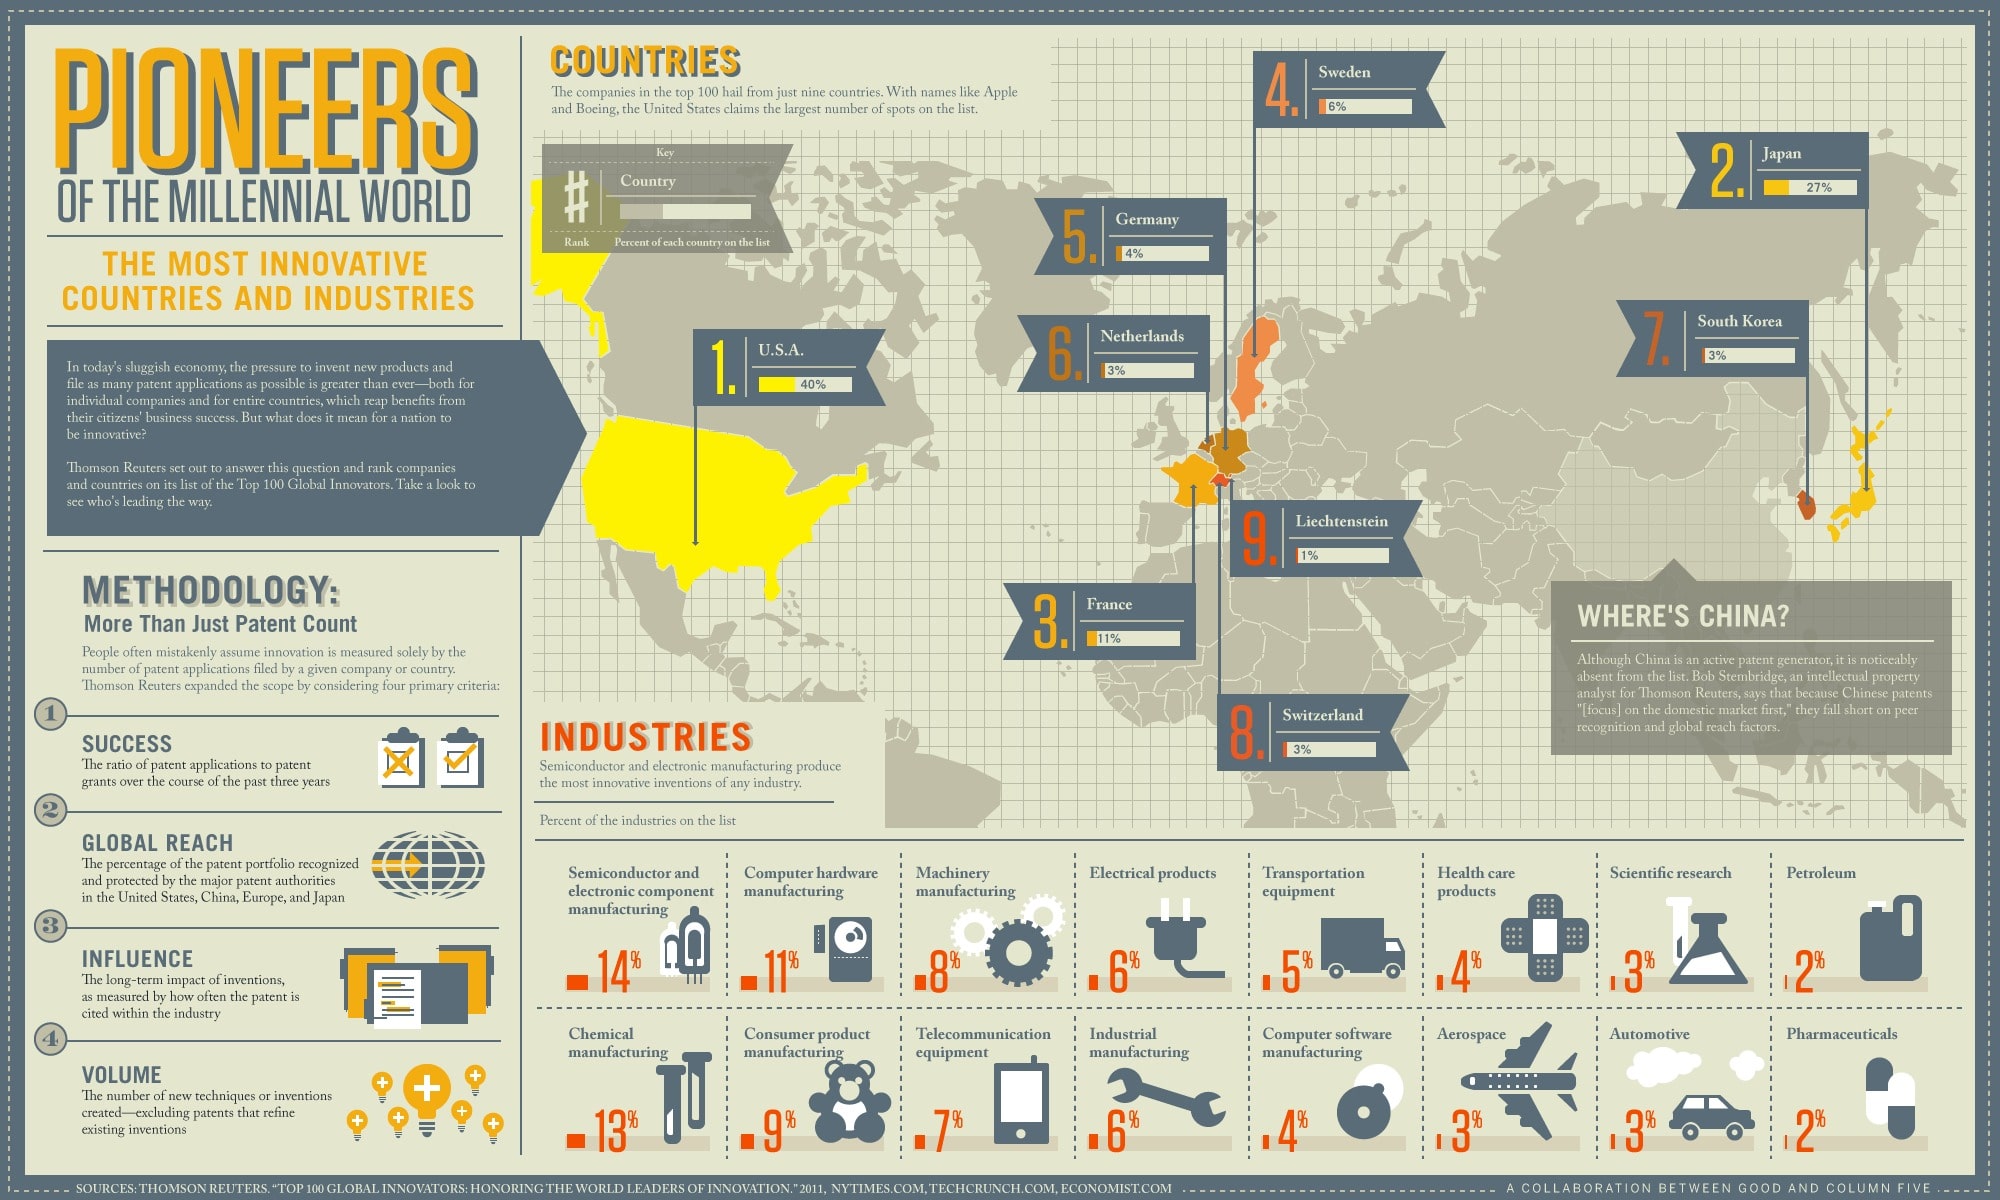 World’s Most Innovative Countries [Infographic]